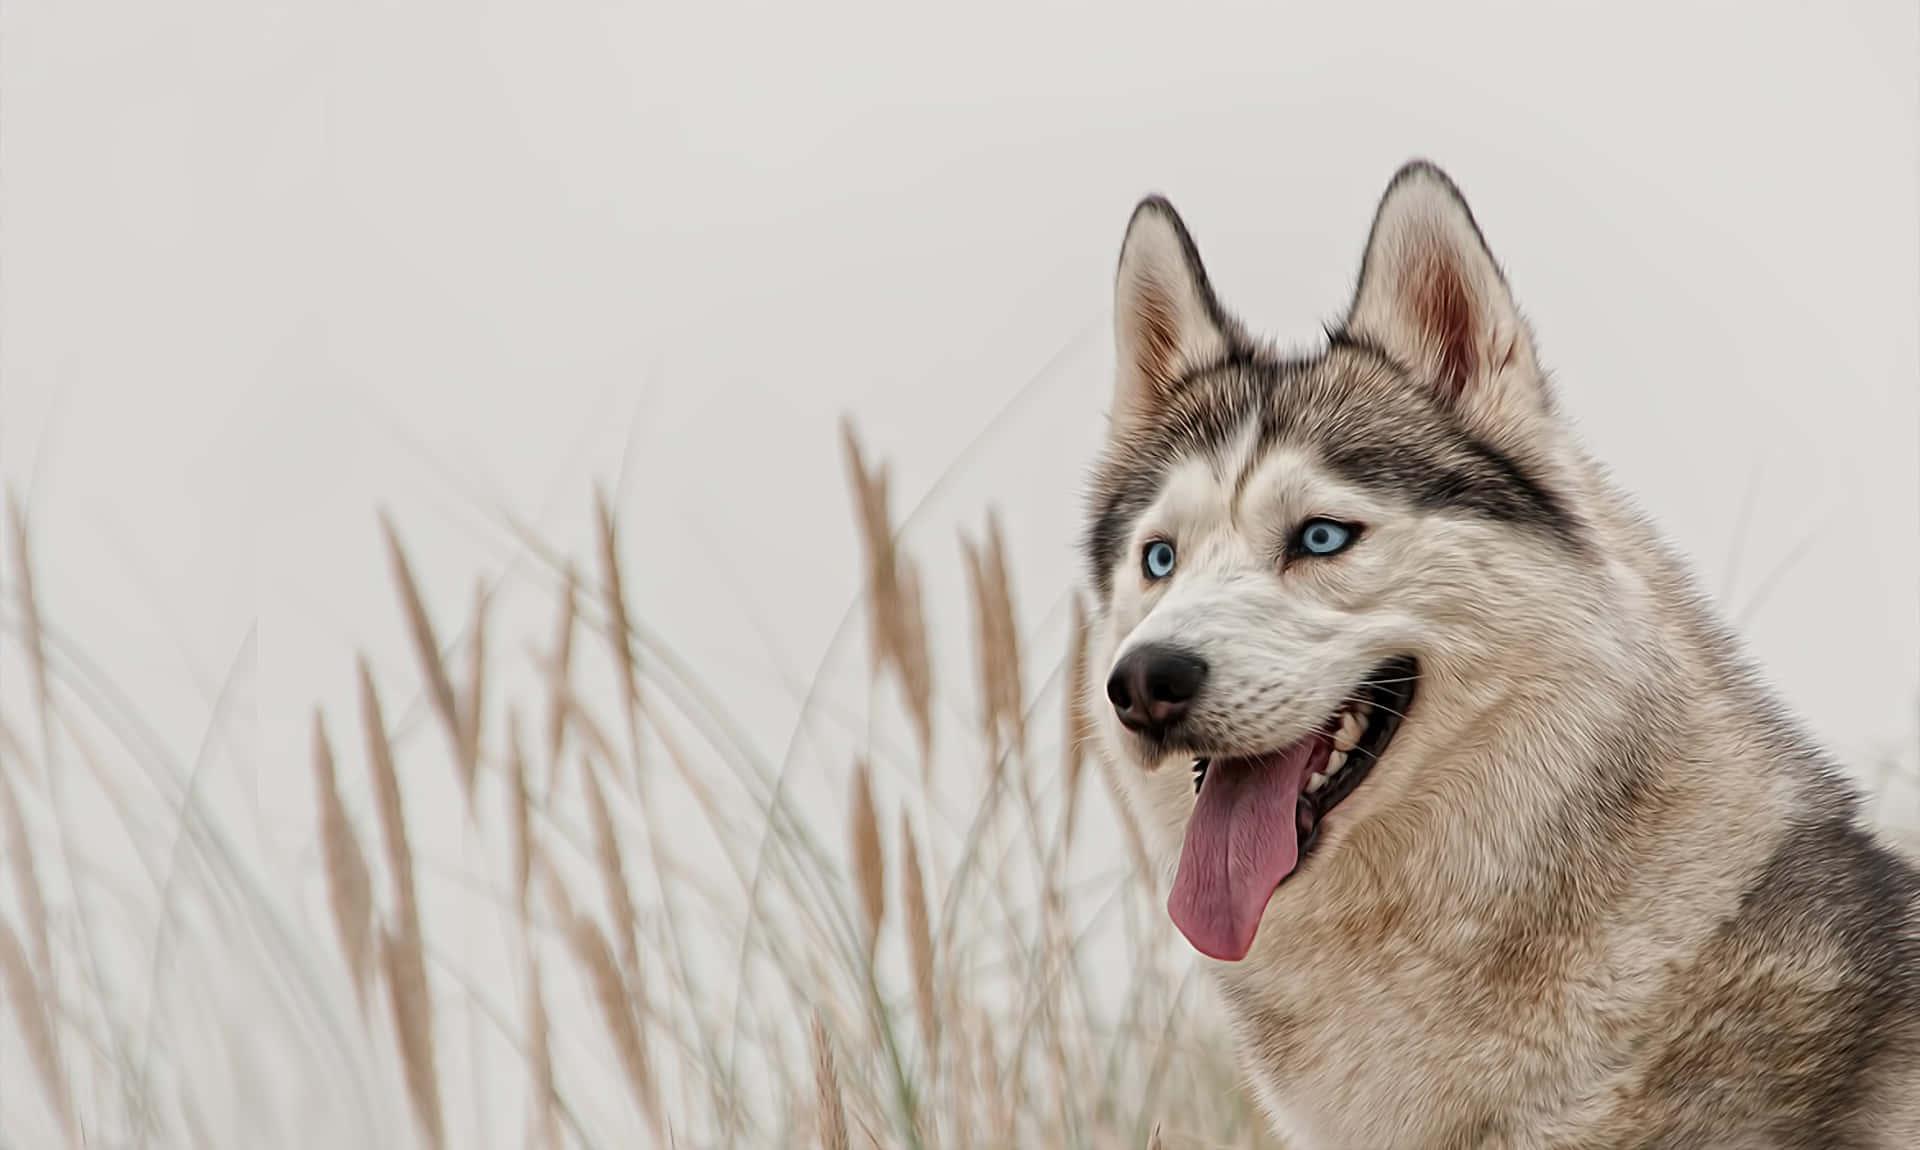 Download wallpapers 4k, Siberian Husky, grunge art, Husky with blue eyes,  cute animals, pets, dogs, blue abstract rays, Husky 4K, husky, abstract  siberian husky for desktop free. Pictures for desktop free